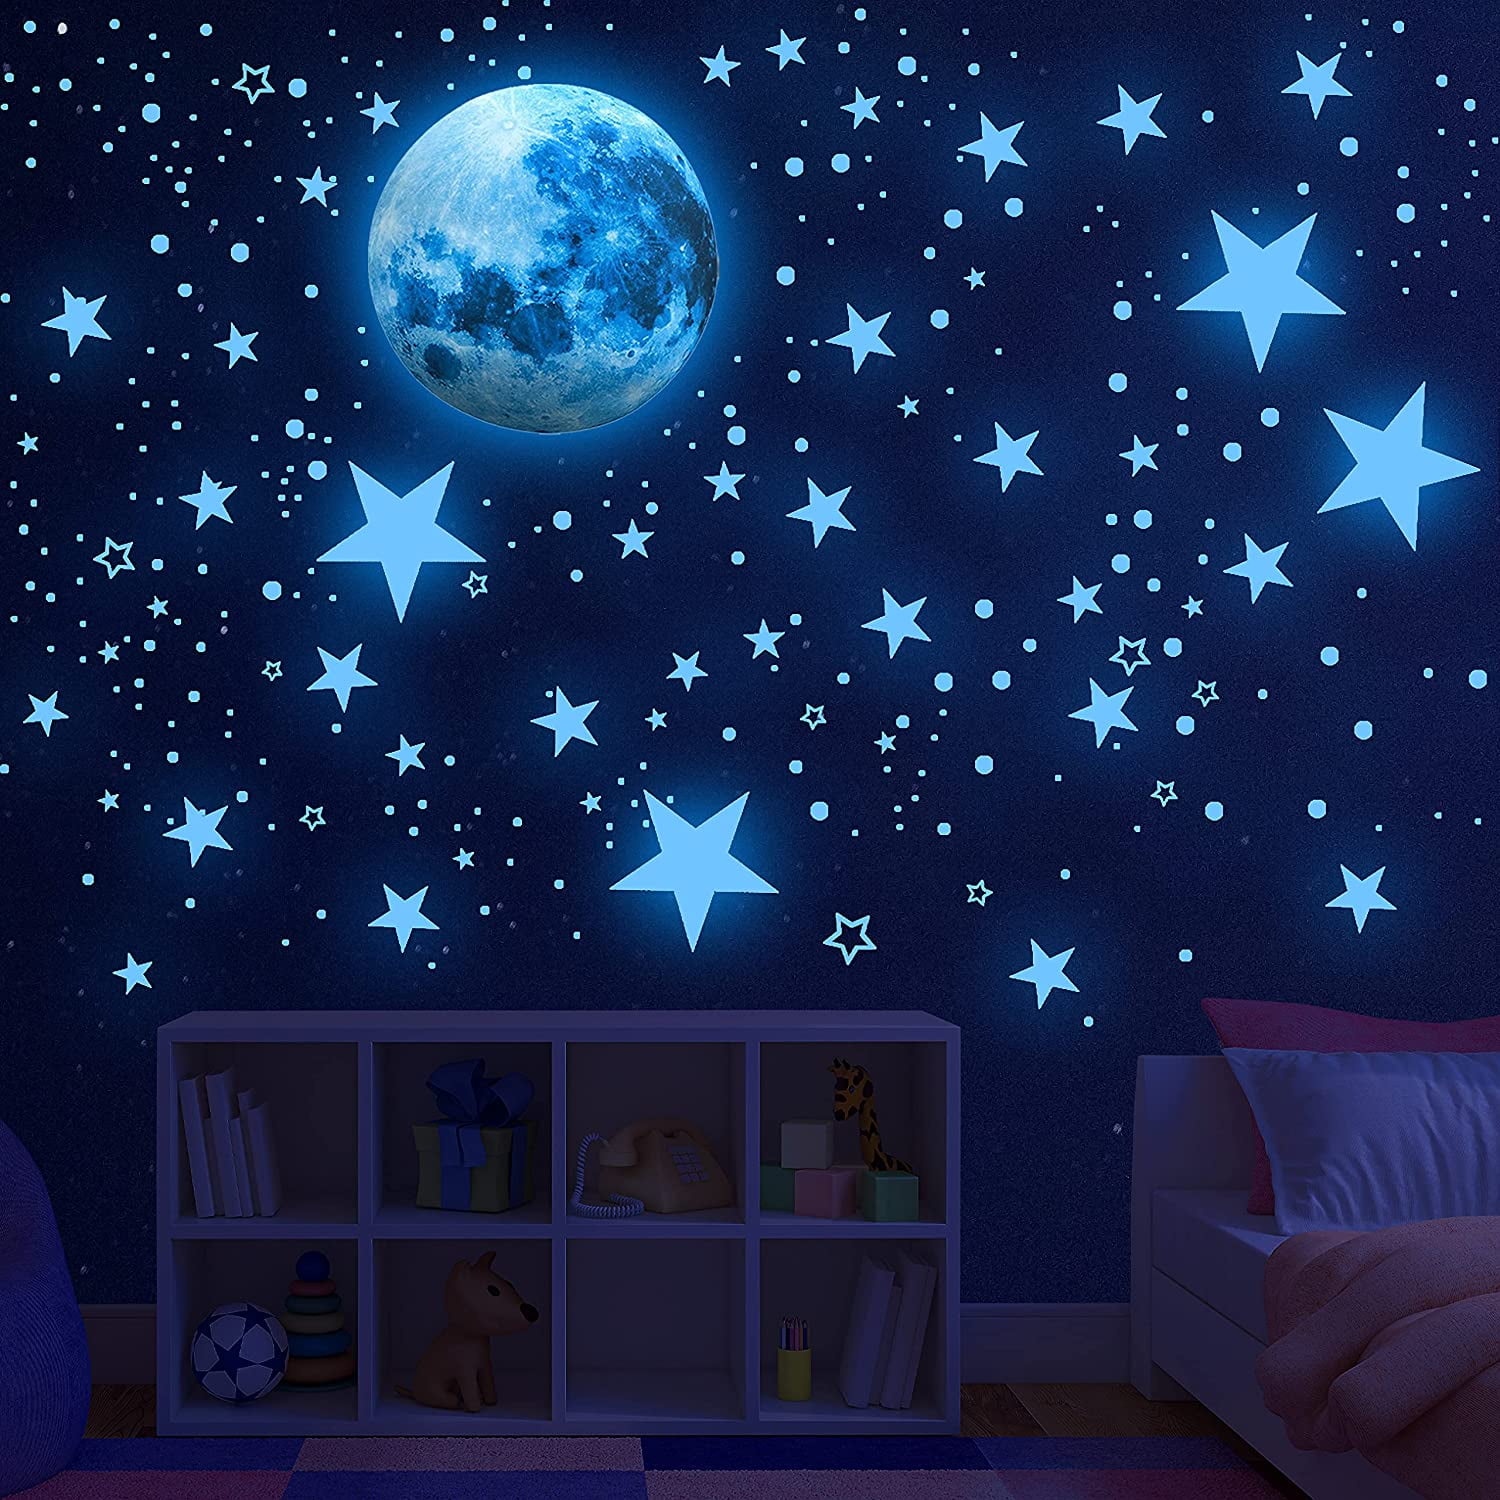 Glow In The Dark Stars For Ceiling, 893pcs Wall Stickers Including Moon And  Stars Decor, Glow In The Dark Wall Stickers For Kids Room